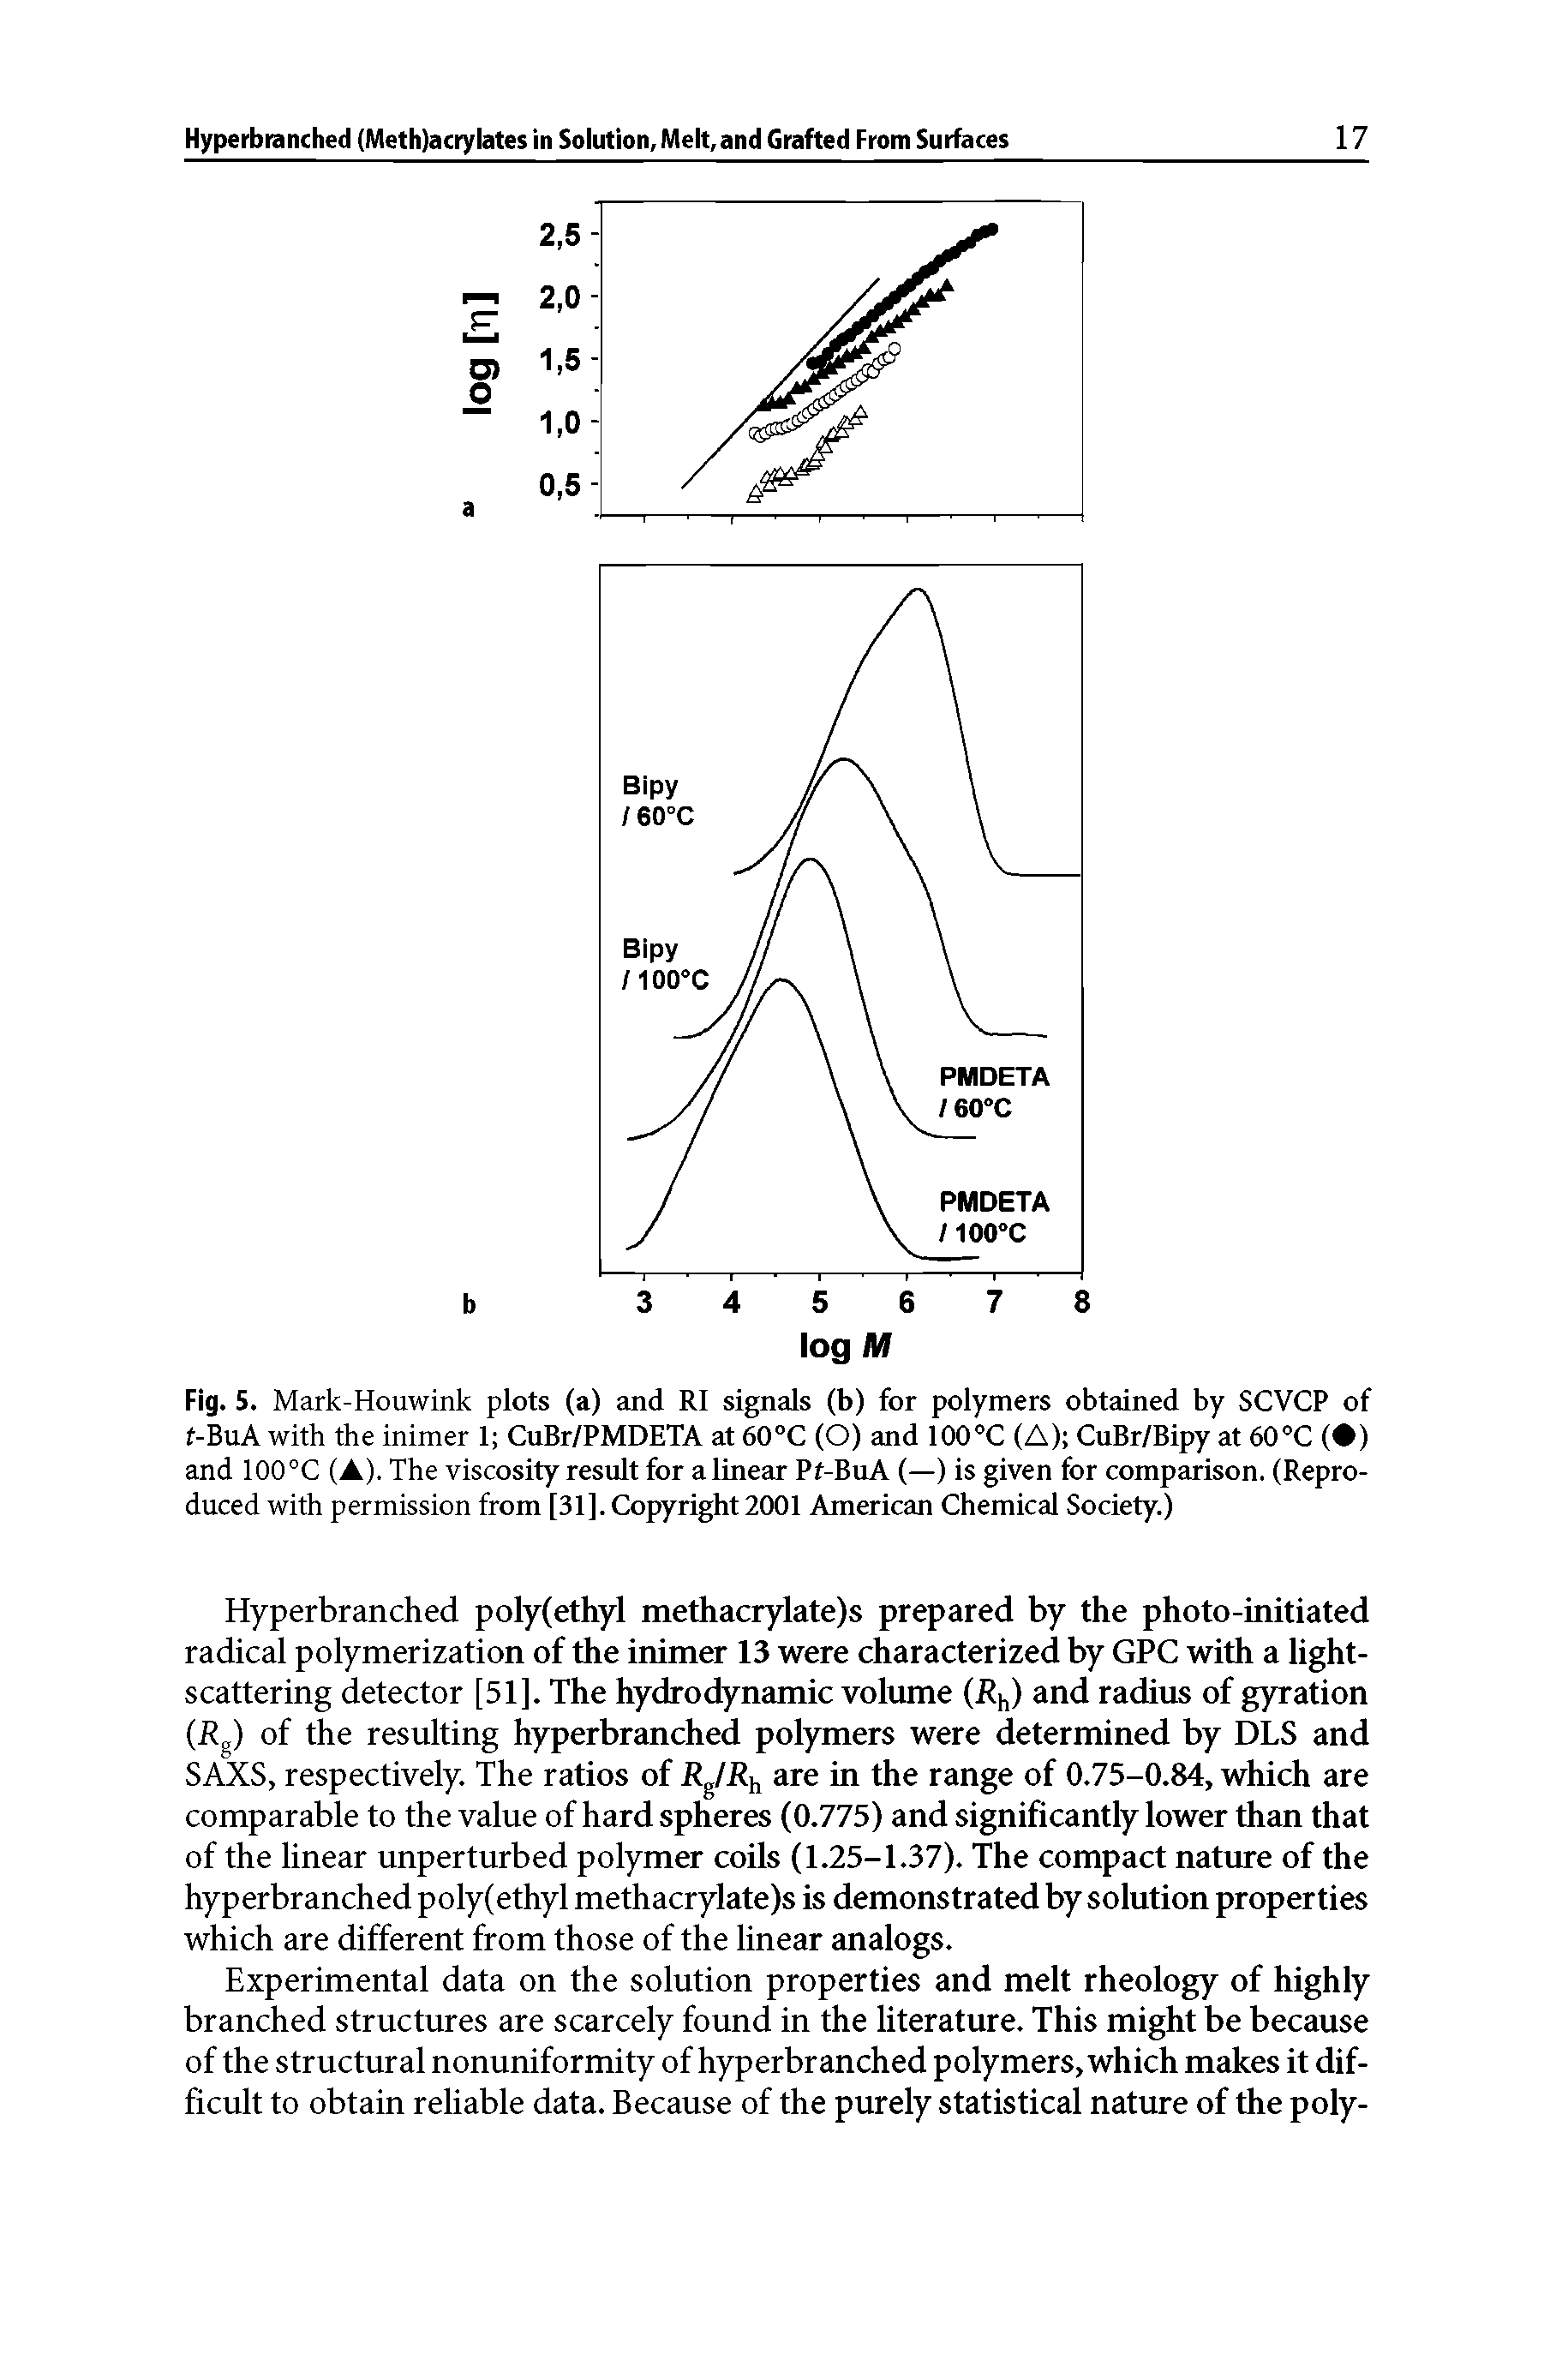 Fig. 5. Mark-Houwink plots (a) and RI signals (b) for polymers obtained by SCVCP of t-BuA with the inimer 1 CuBr/PMDETA at 60°C (O) and 100°C (A) CuBr/Bipy at 60°C ( ) and 100 °C (A). The viscosity result for a linear Pf-BuA (—) is given for comparison. (Reproduced with permission from [31], Copyright 2001 American Chemical Society.)...